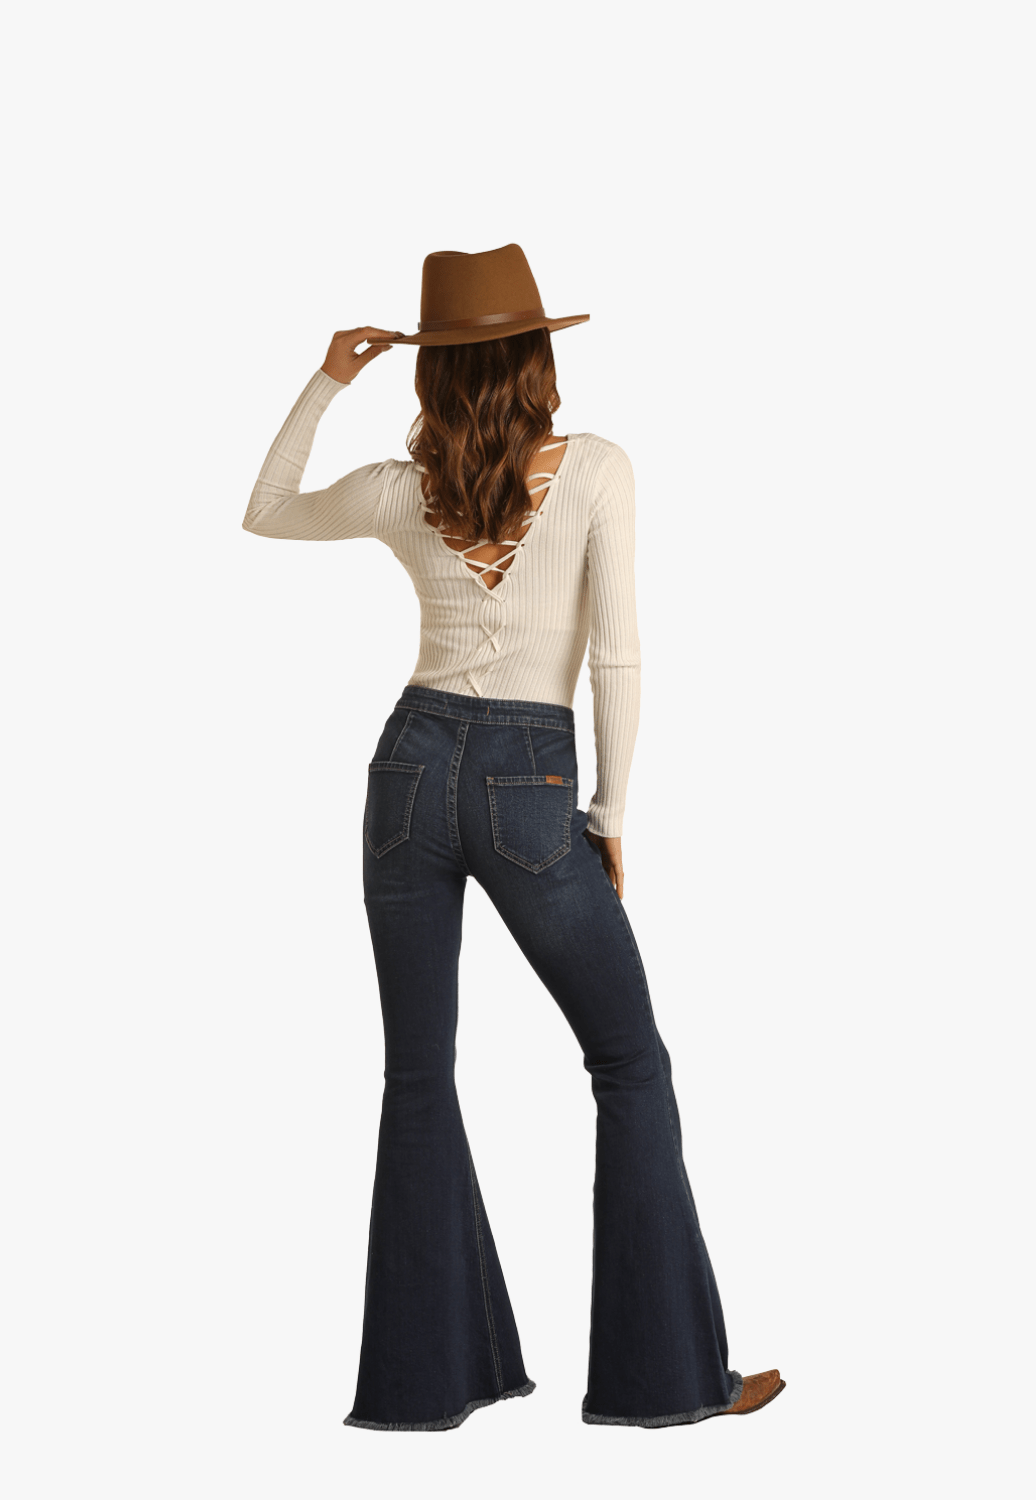 Rock and Roll Womens Bell Bottom Jean - W. Titley & Co